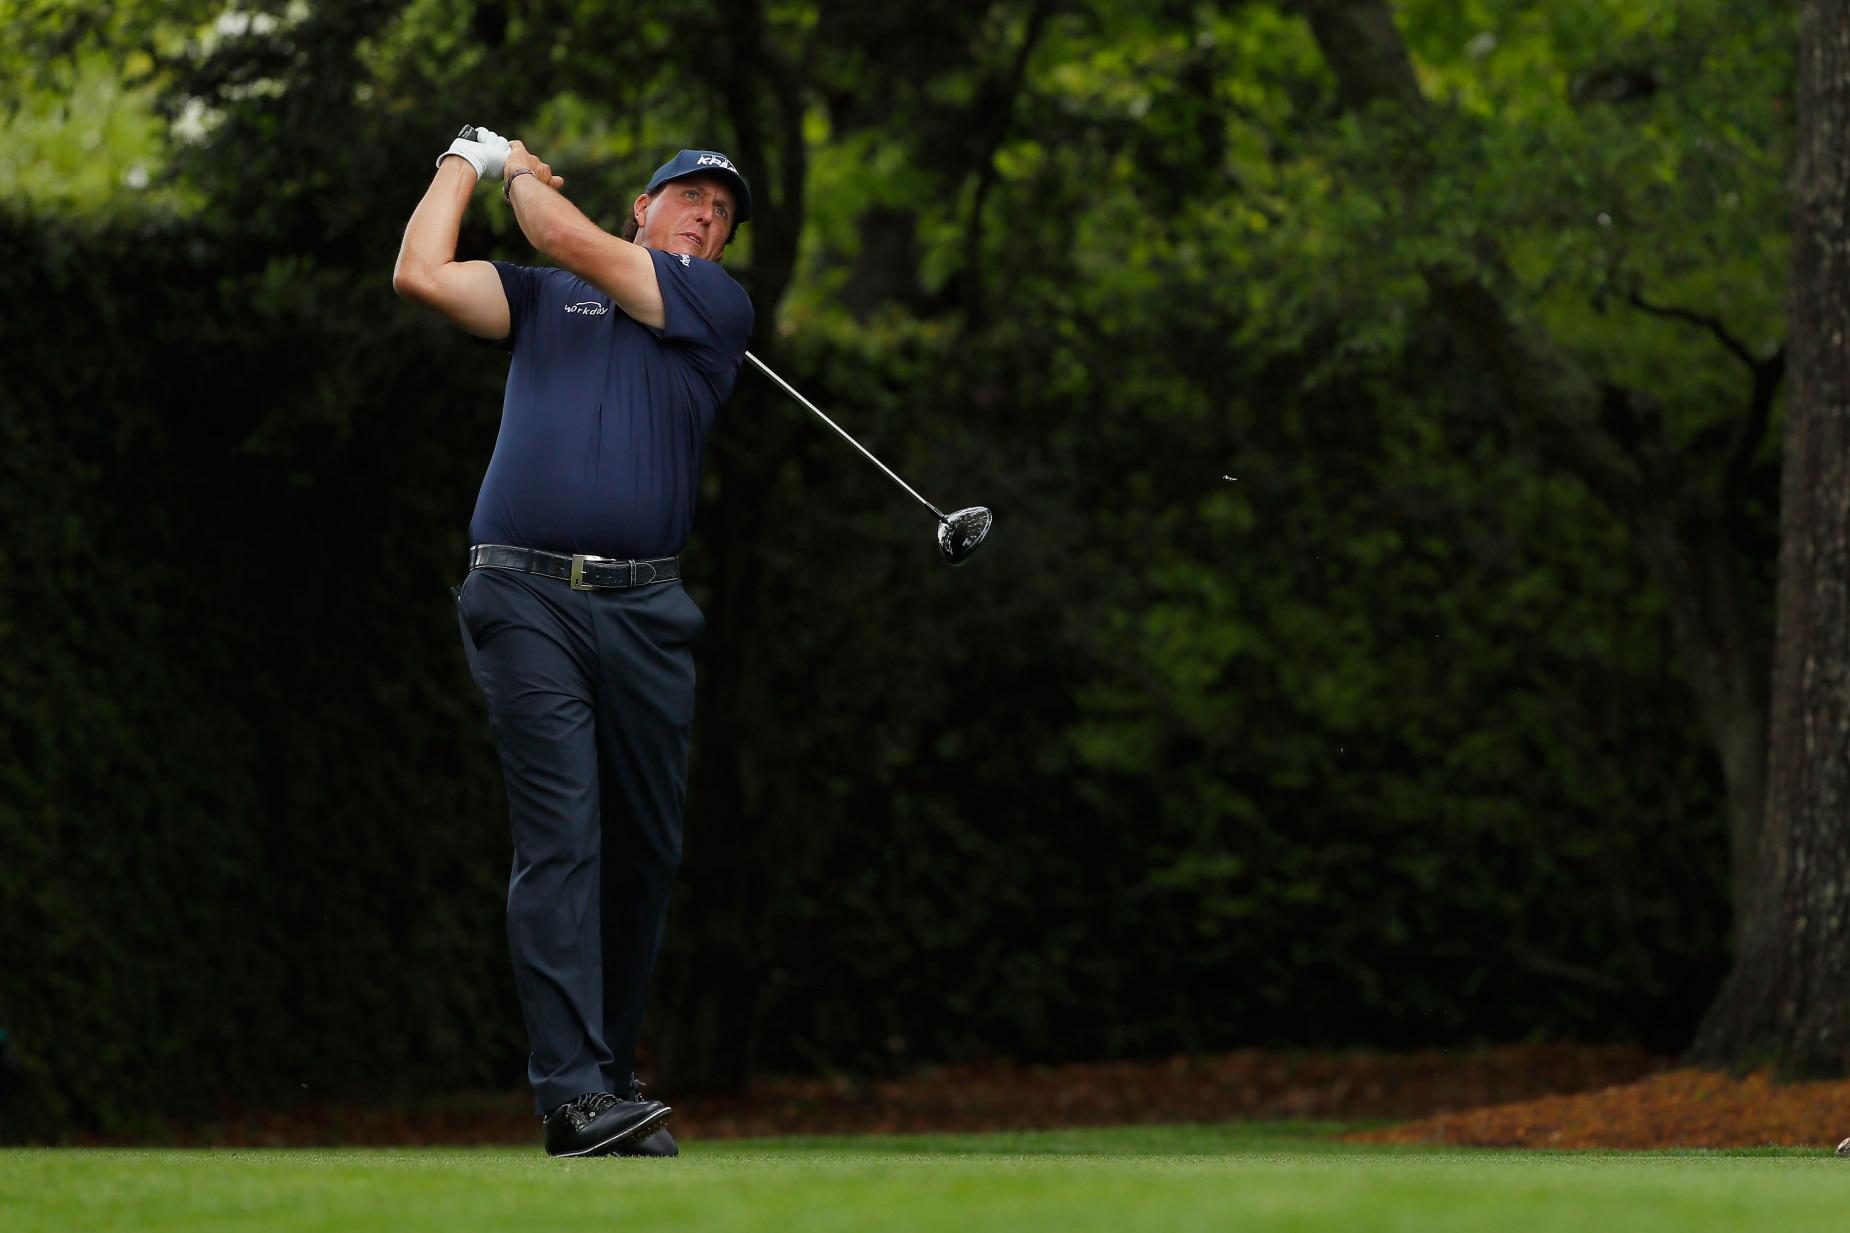 Masters 2019: 'Old Man' Mickelson still plays like his younger self as